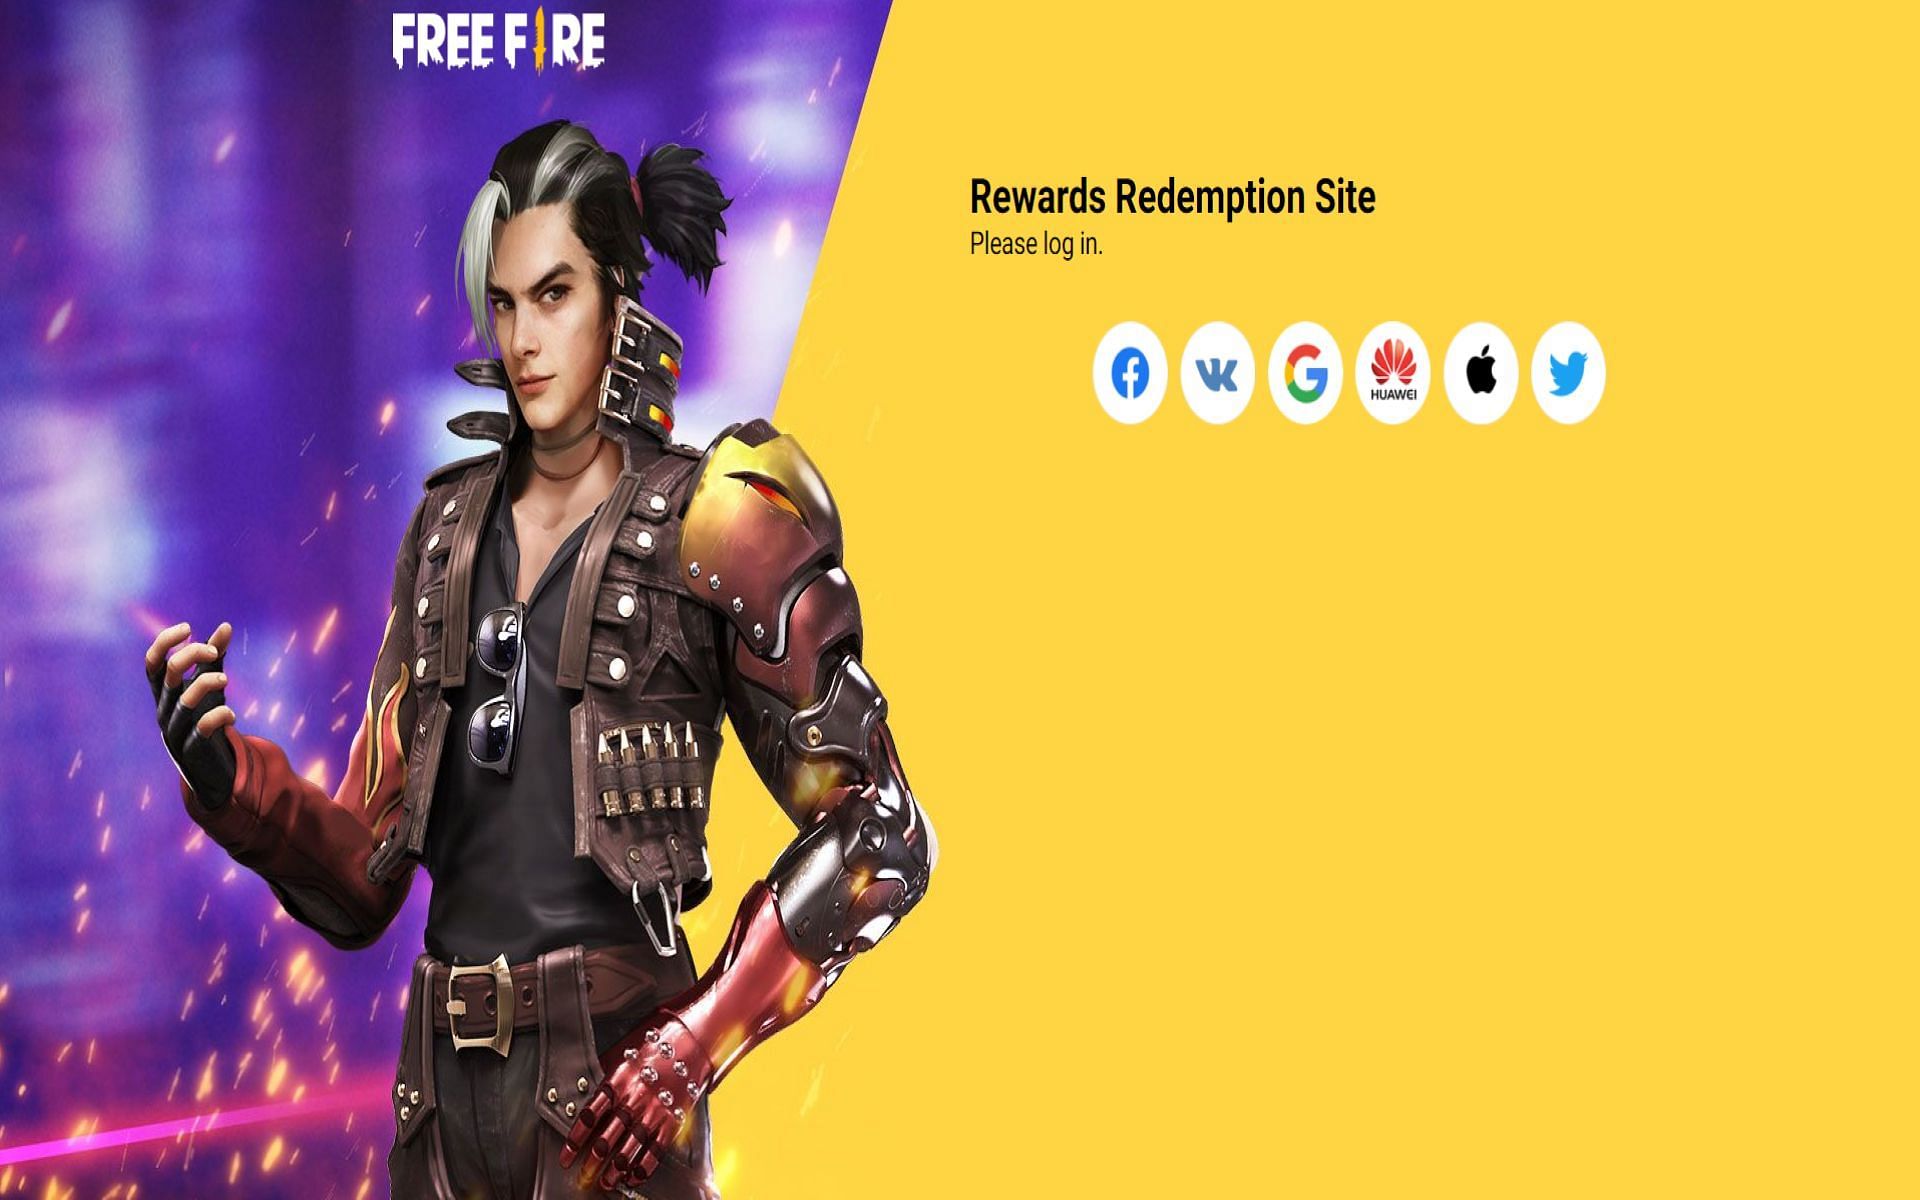 Redeem codes can be used in the redemption site of Garena Free Fire (Image via Garena Free Fire)